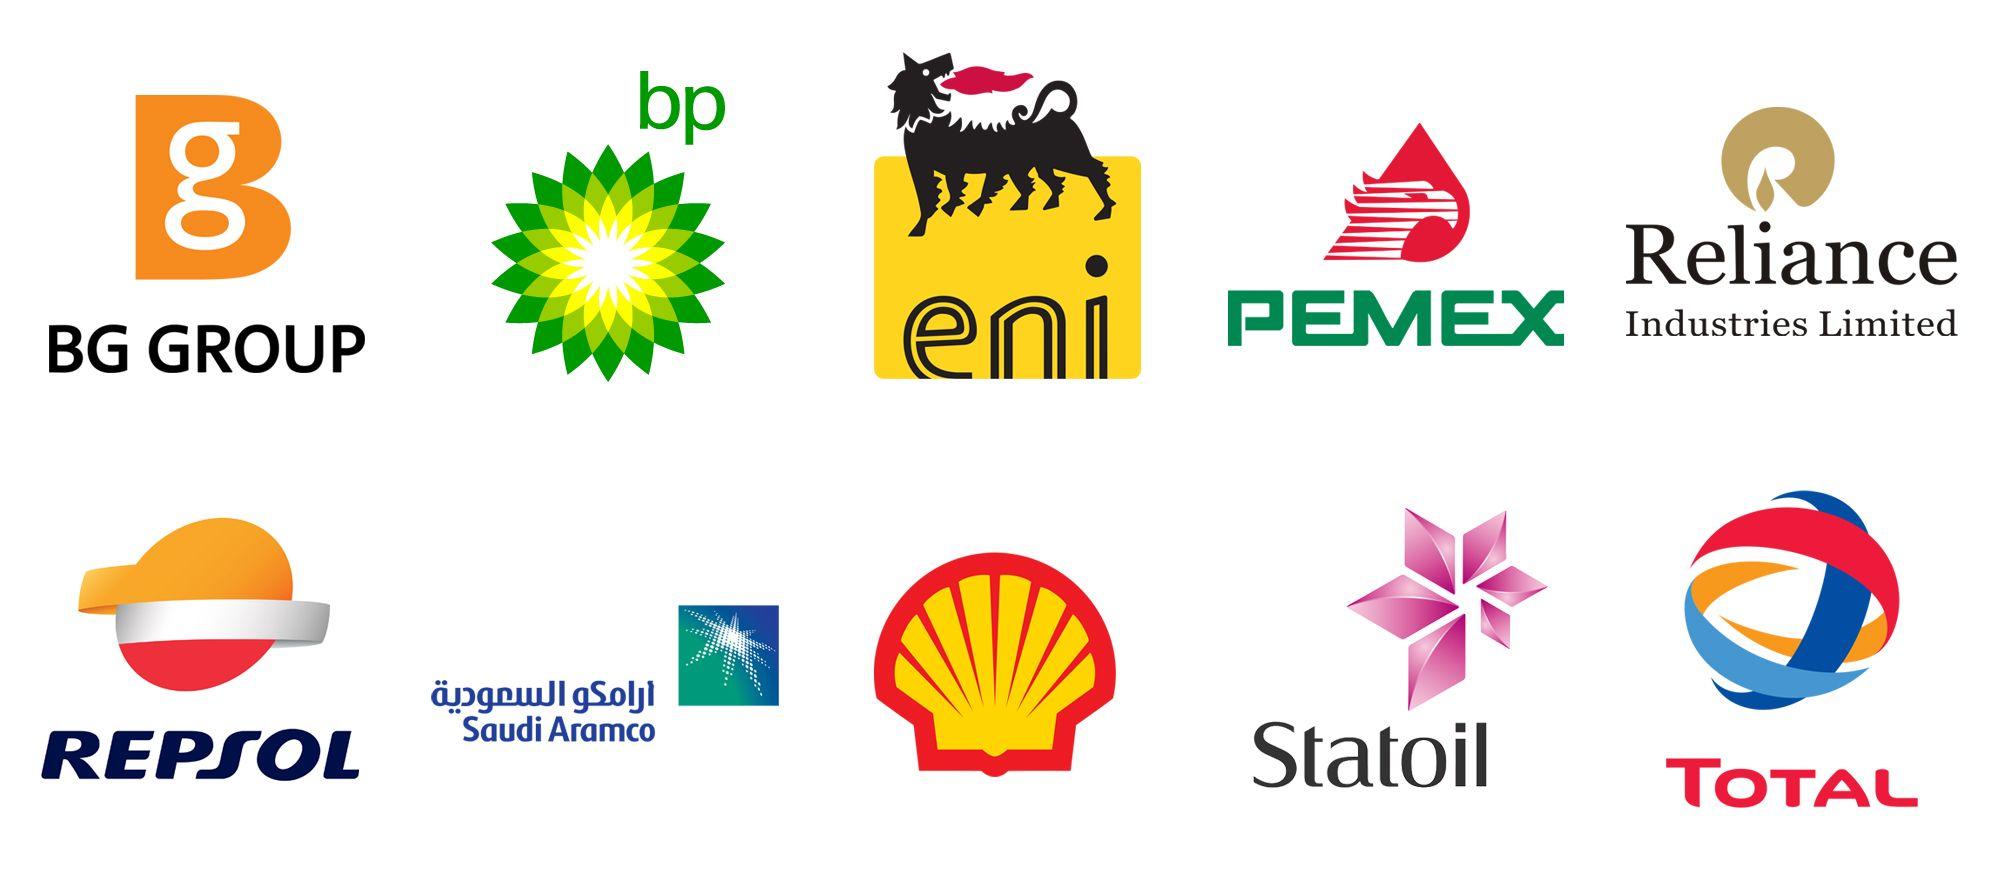 Oil and Gas Company Logo - Oil and gas Logos